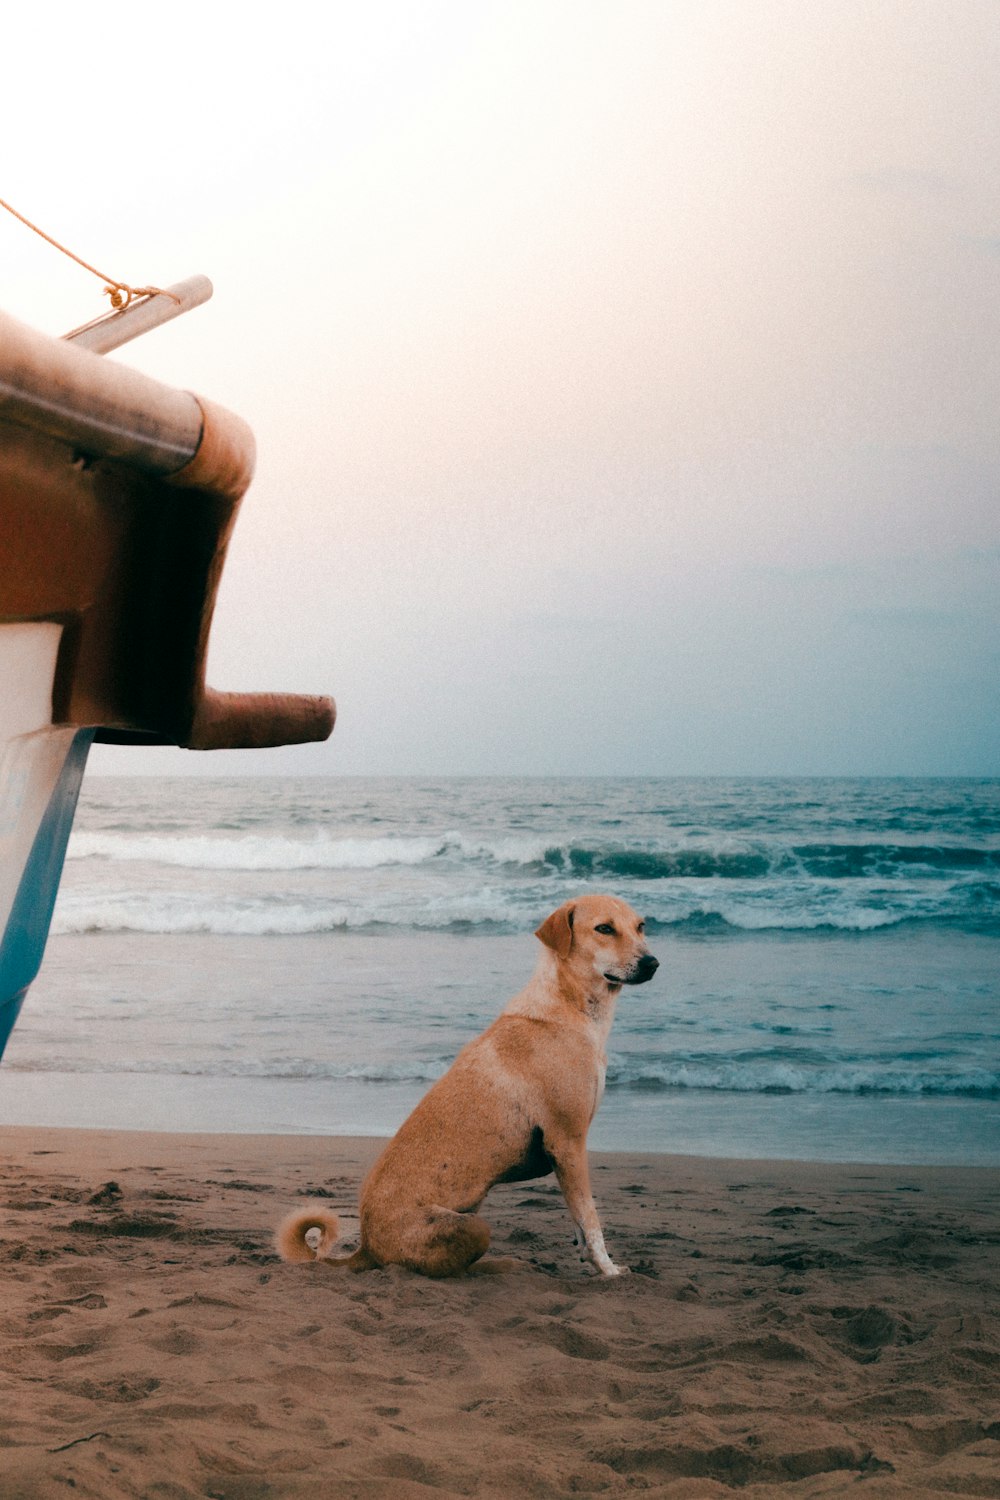 a dog sitting on a beach next to a boat